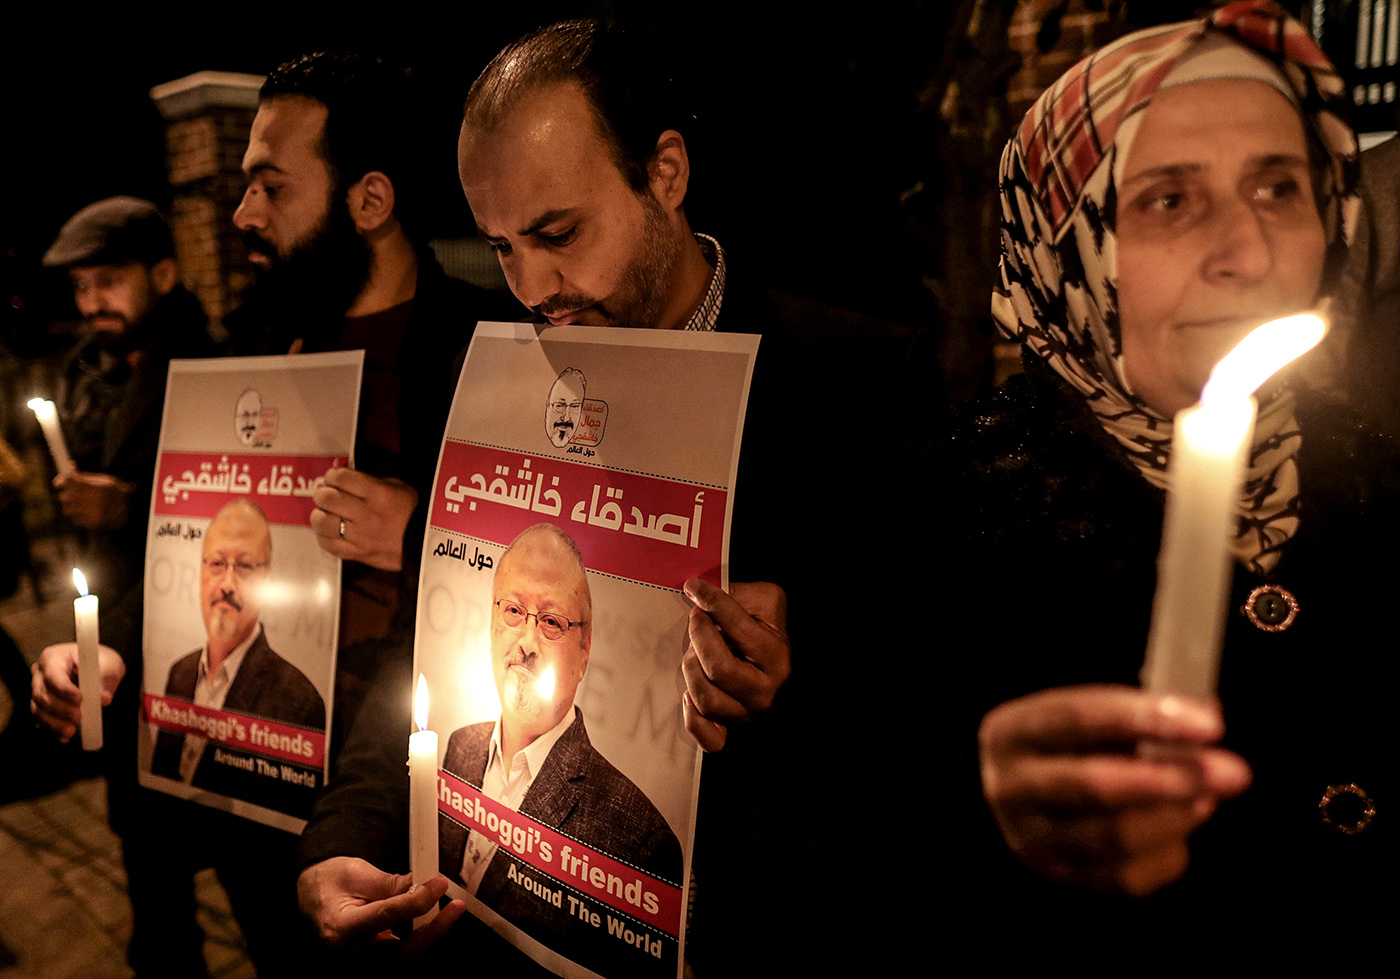 Protestors hold candles and pictures of Jamal Khashoggi during the demonstration in front of Saudi Arabian consulate in Istanbul, Turkey, 25 October 2018.